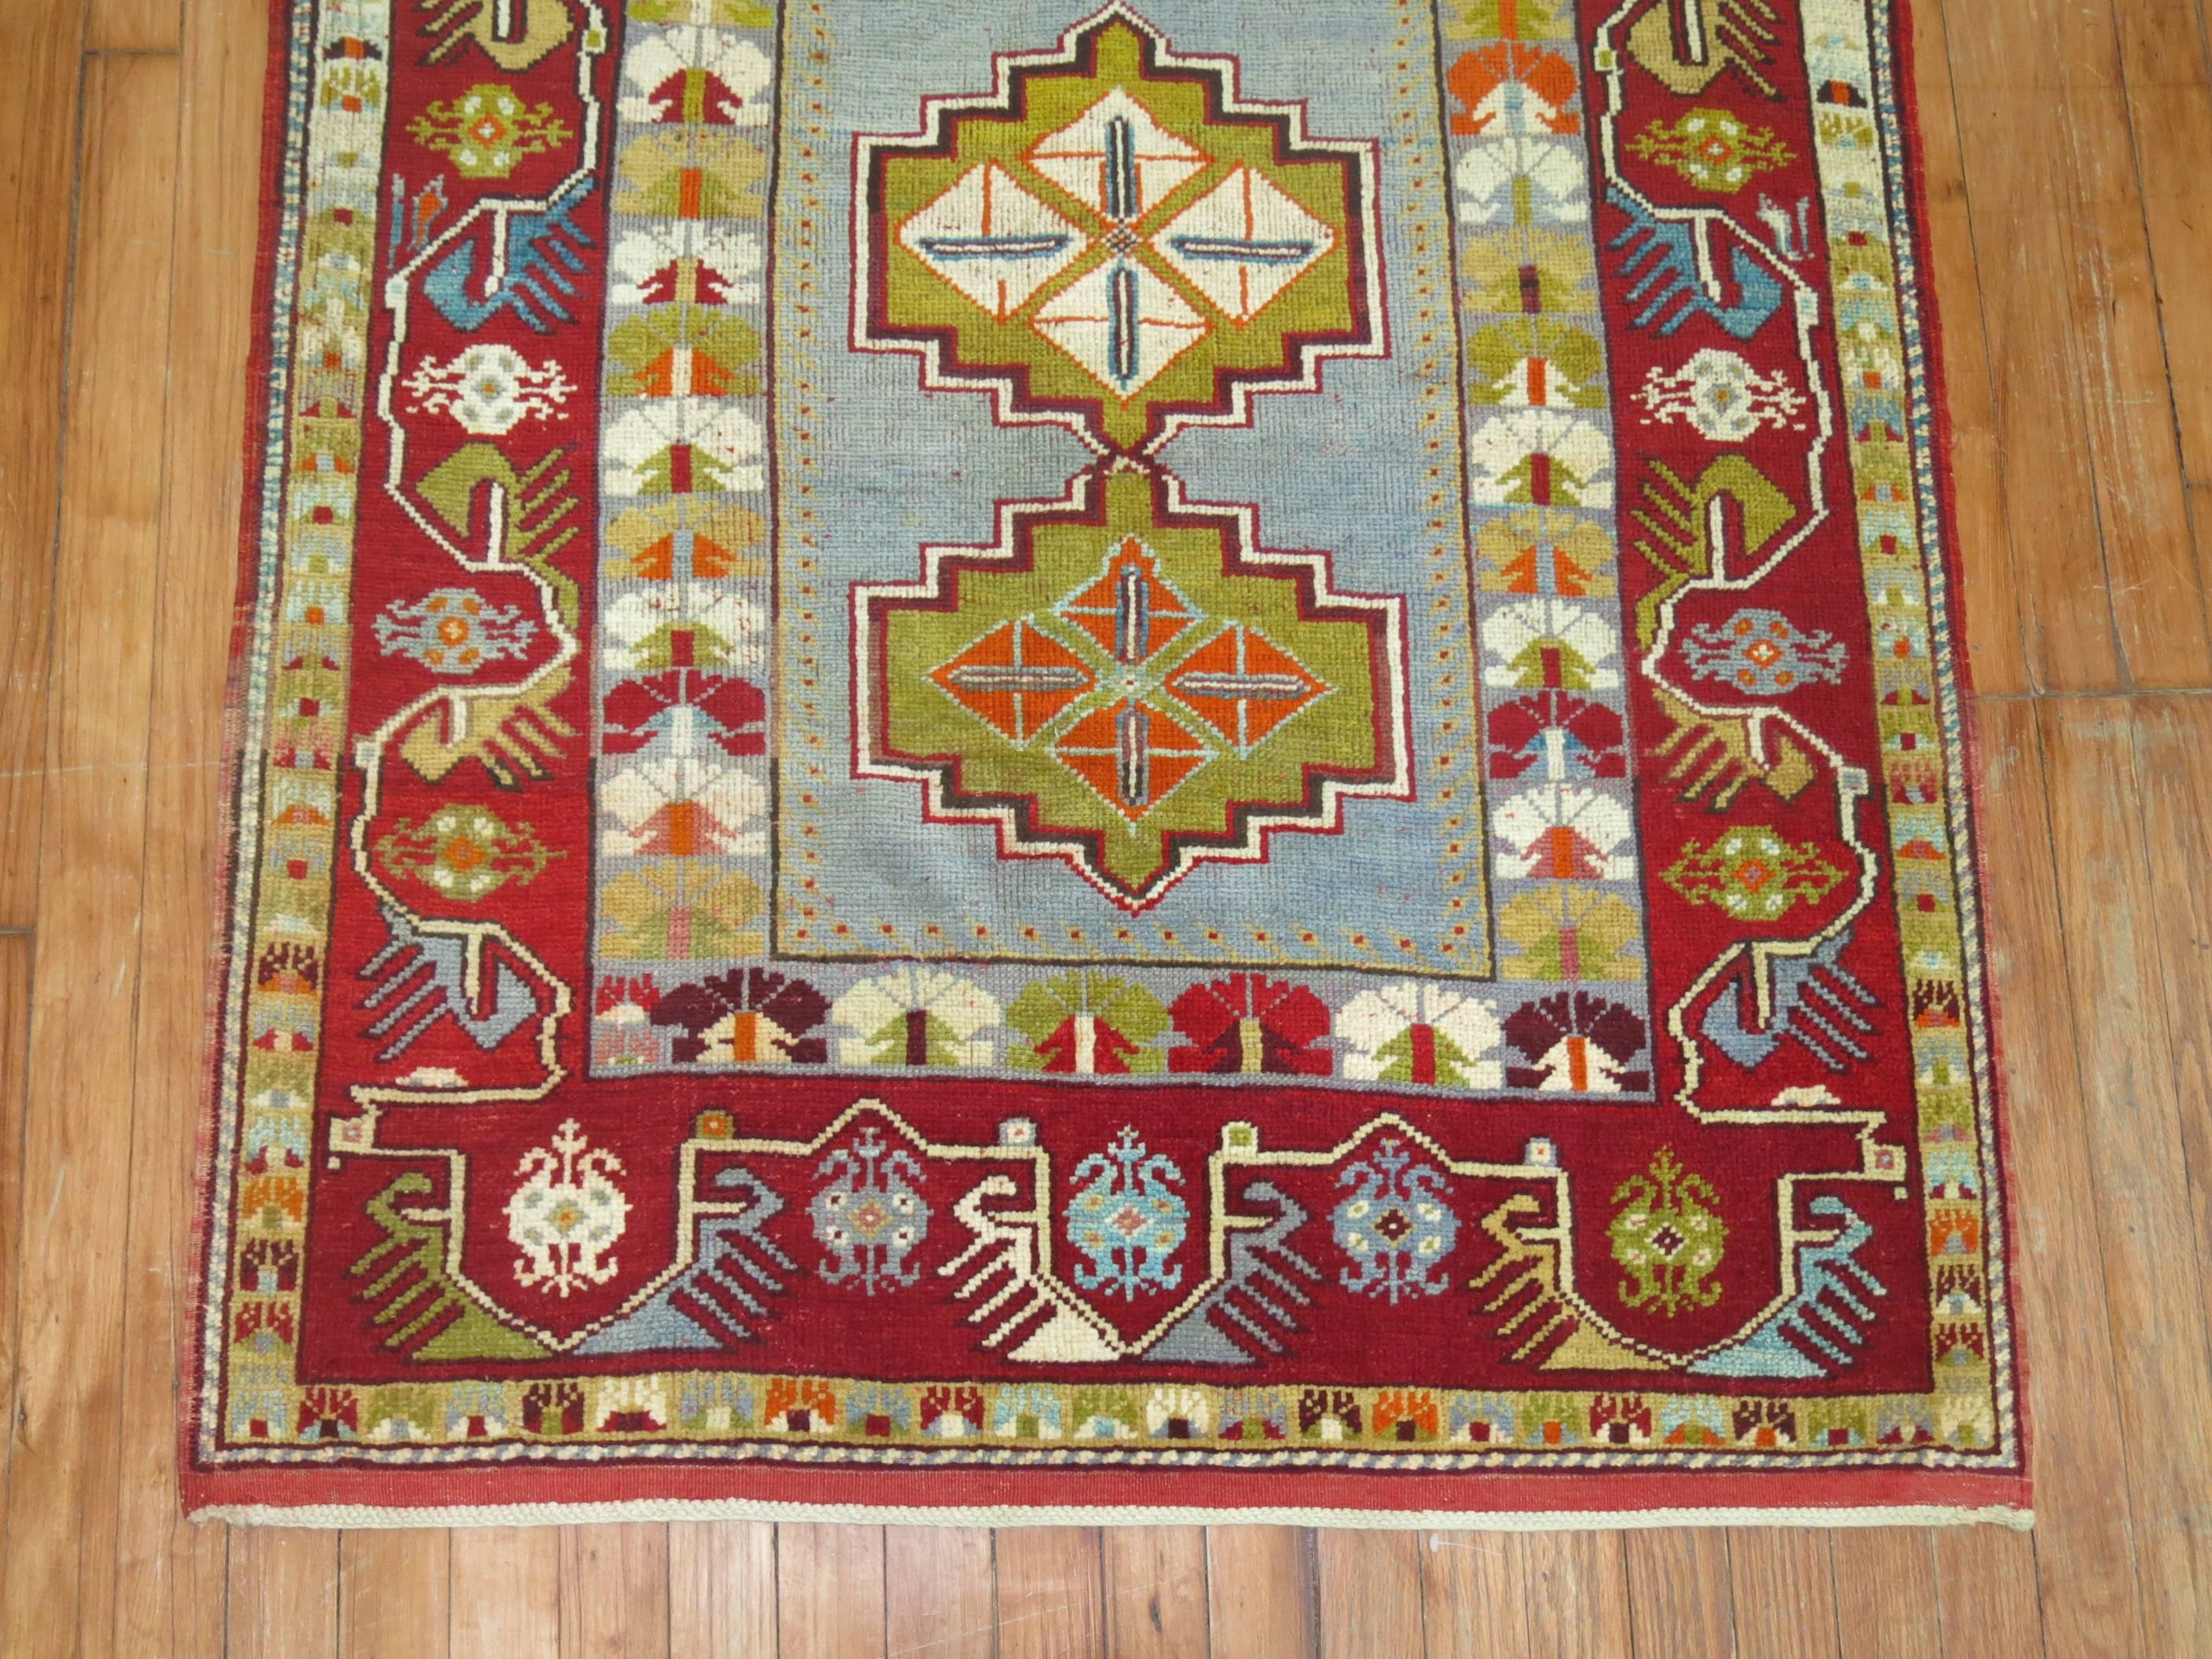 An early 20th century Turkish rug with vivid blues and red.

3'4'' x 4'2''